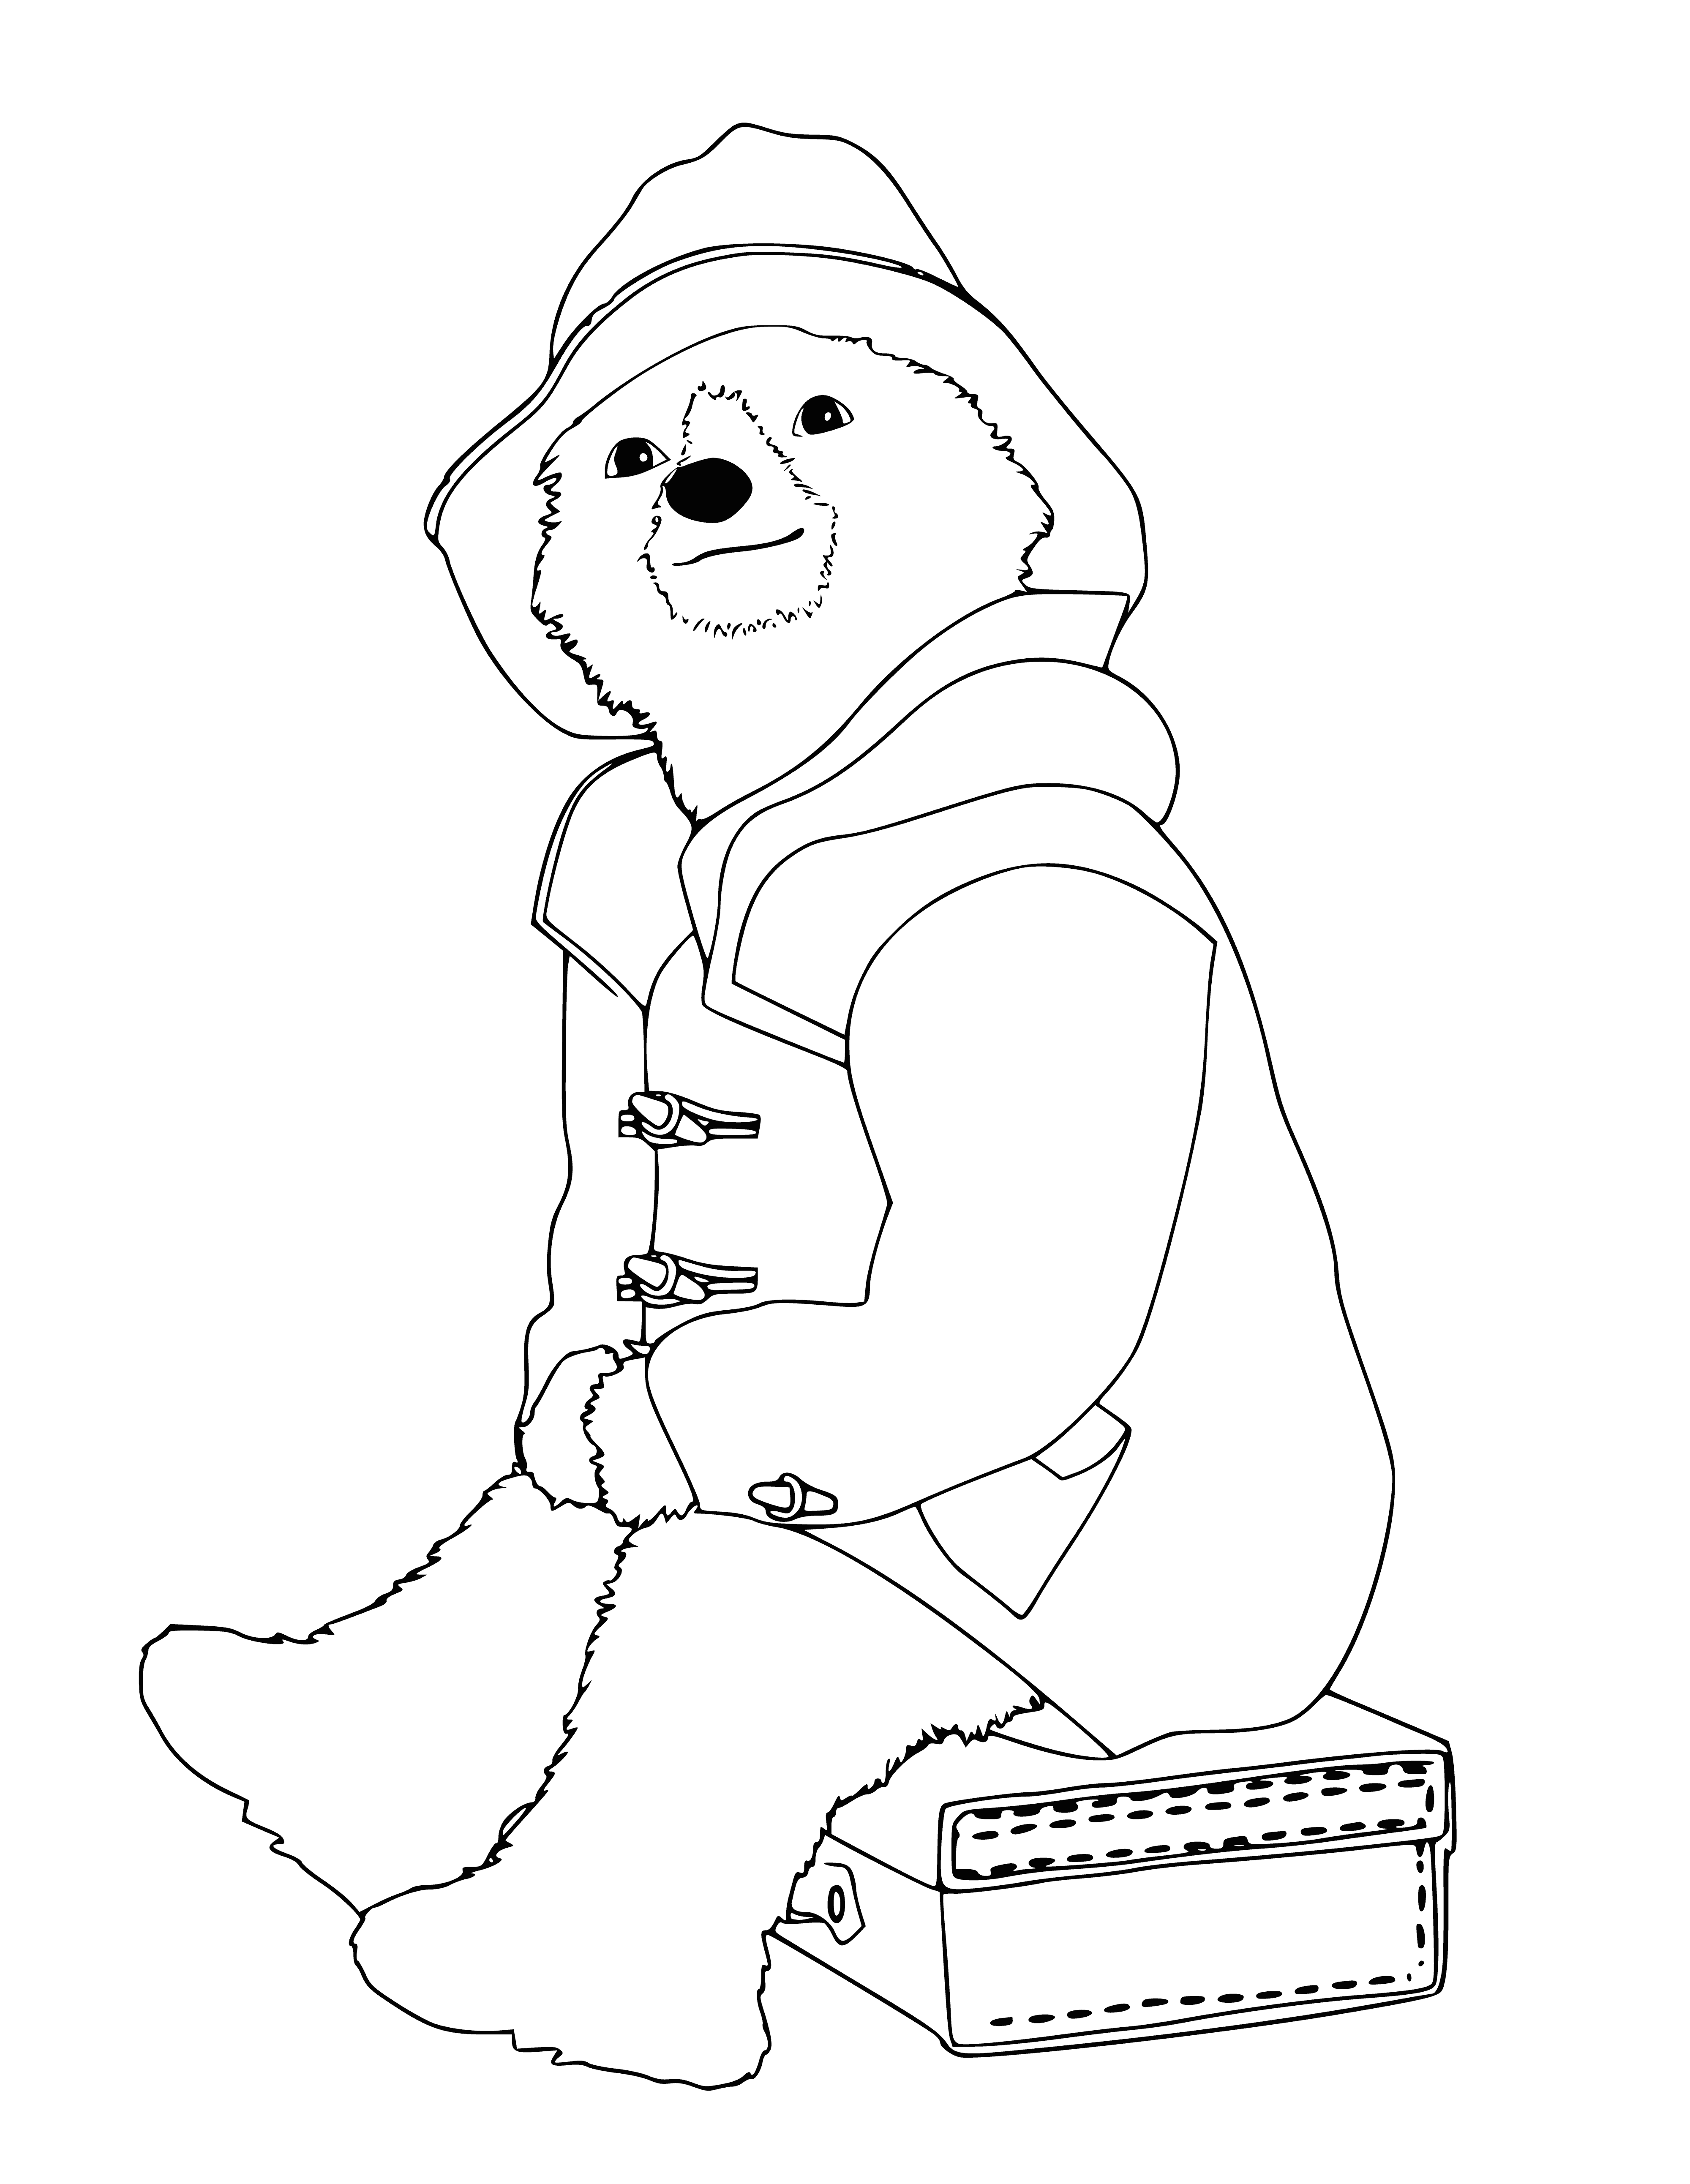 Paddington sits on a suitcase coloring page